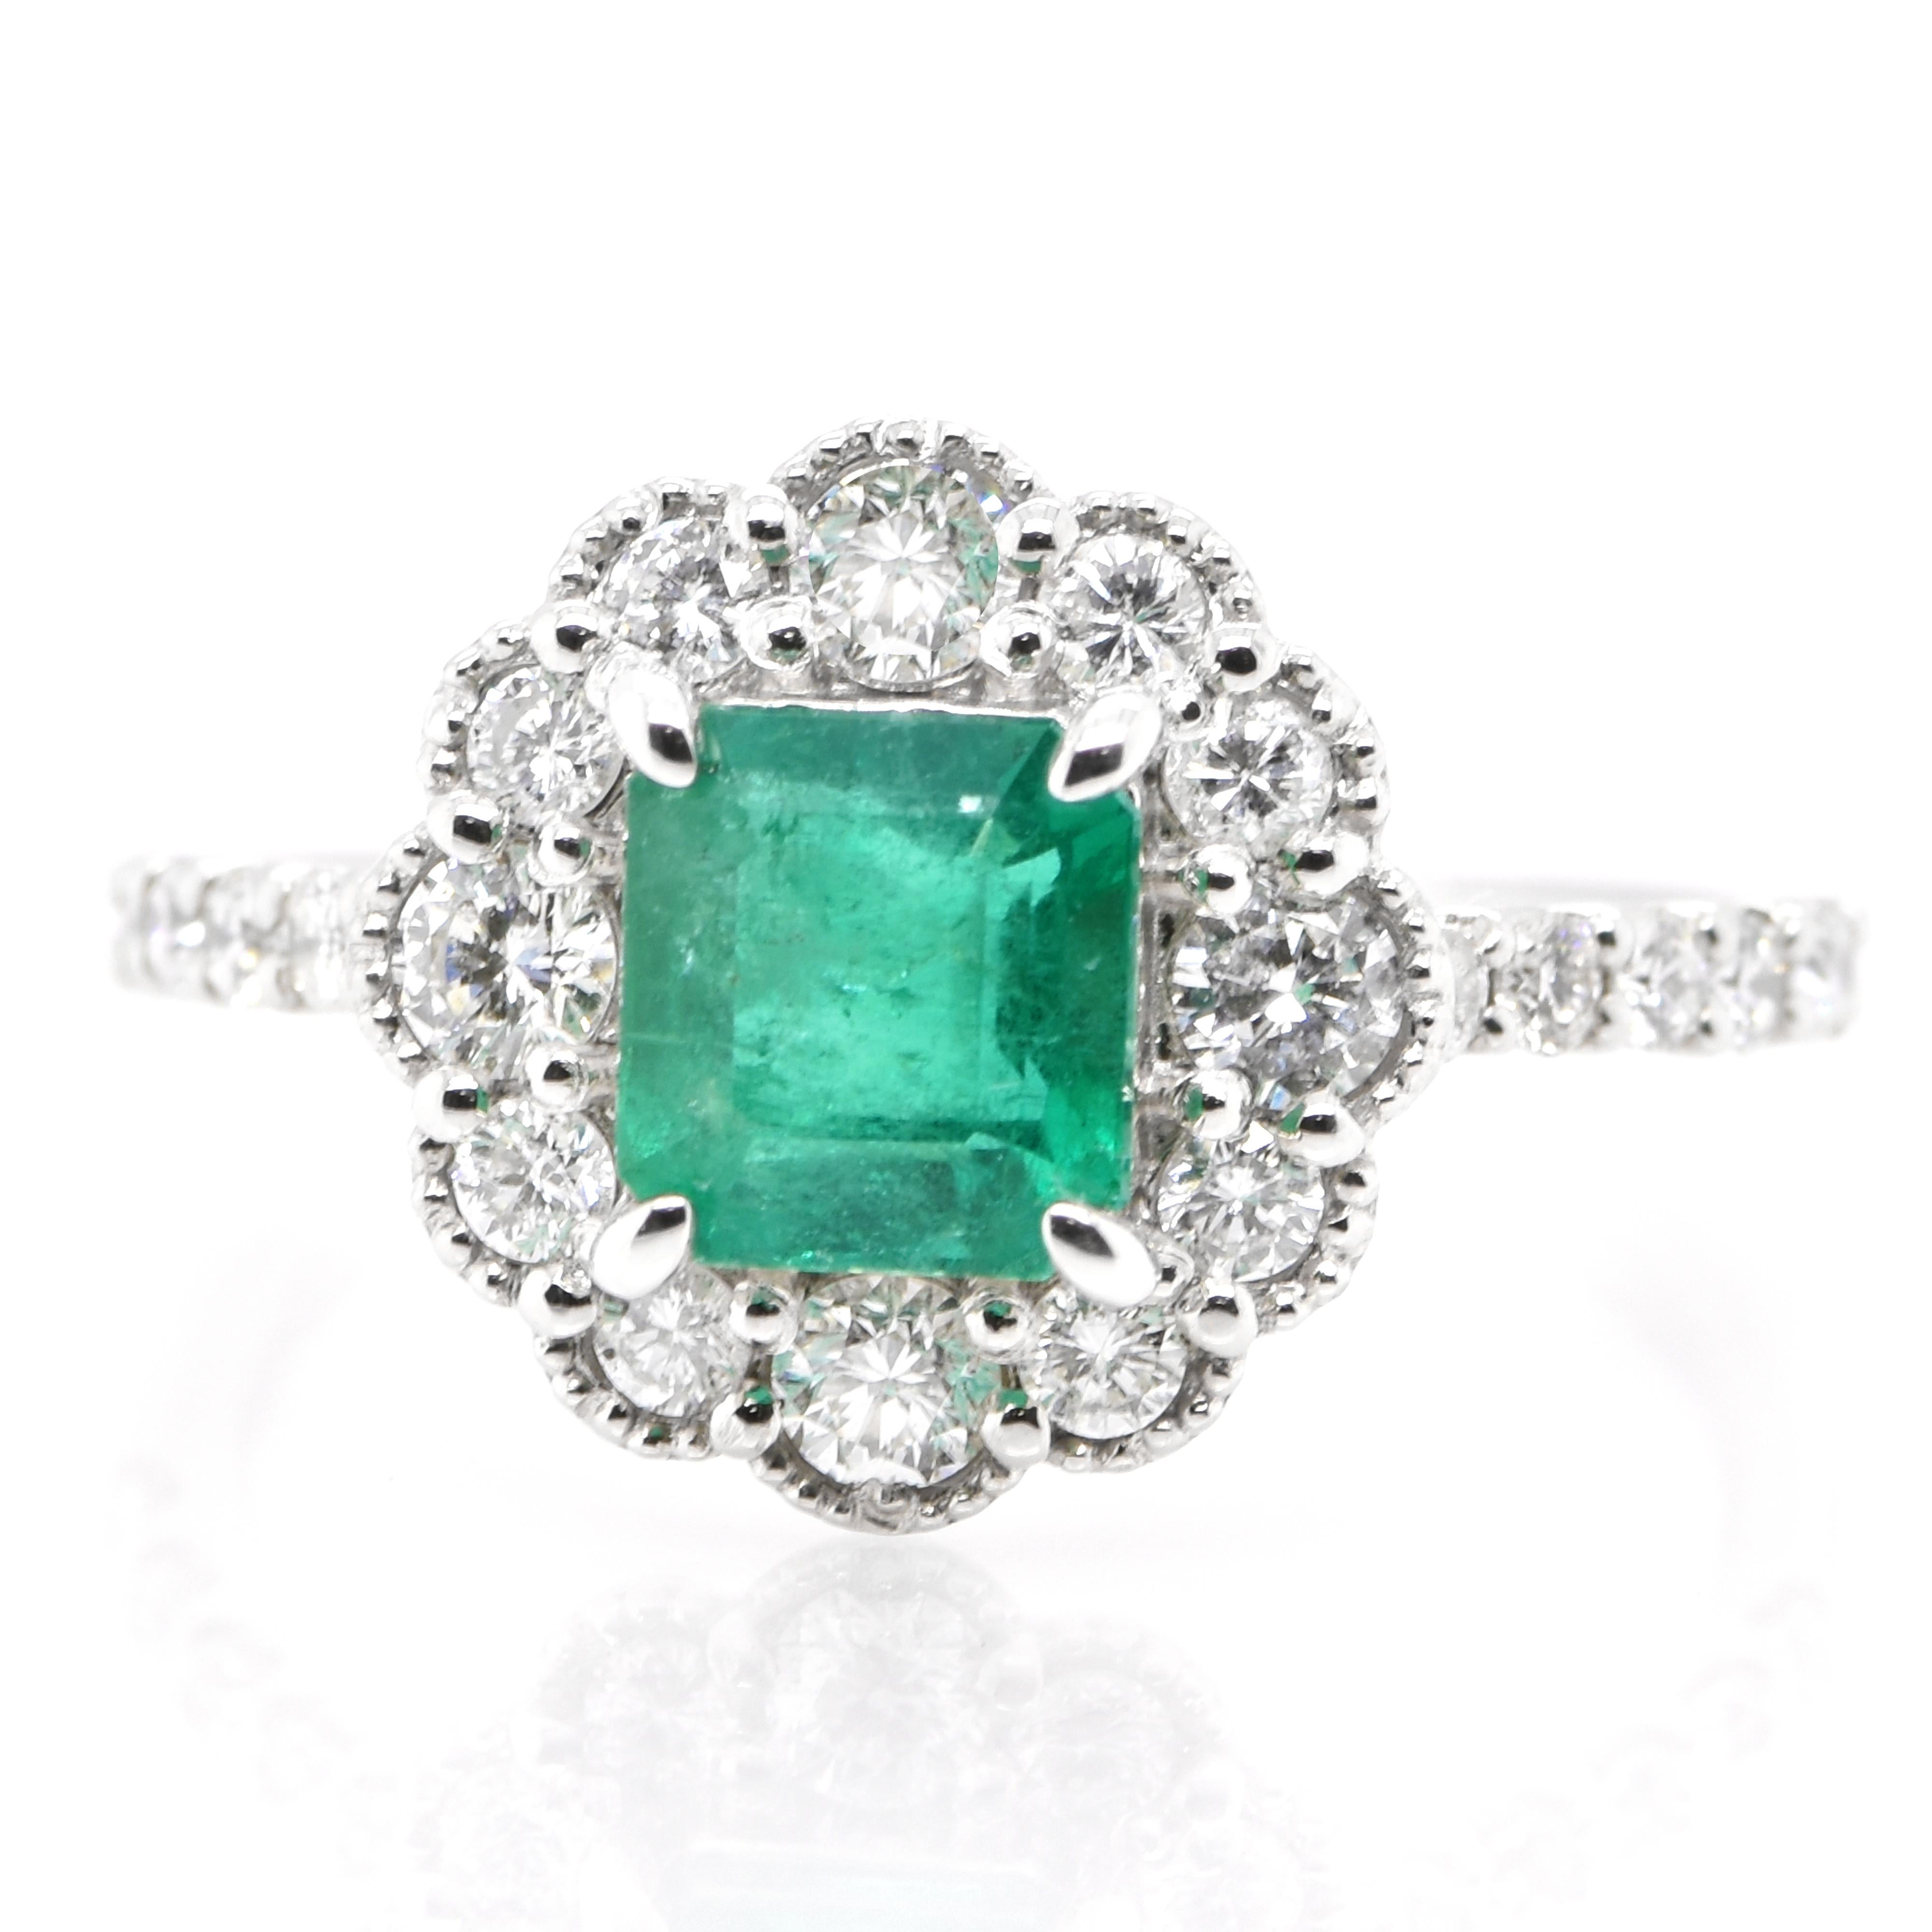 A stunning ring featuring a 1.162 Carat Natural Emerald and 0.54 Carats of Diamond Accents set in Platinum. People have admired emerald’s green for thousands of years. Emeralds have always been associated with the lushest landscapes and the richest